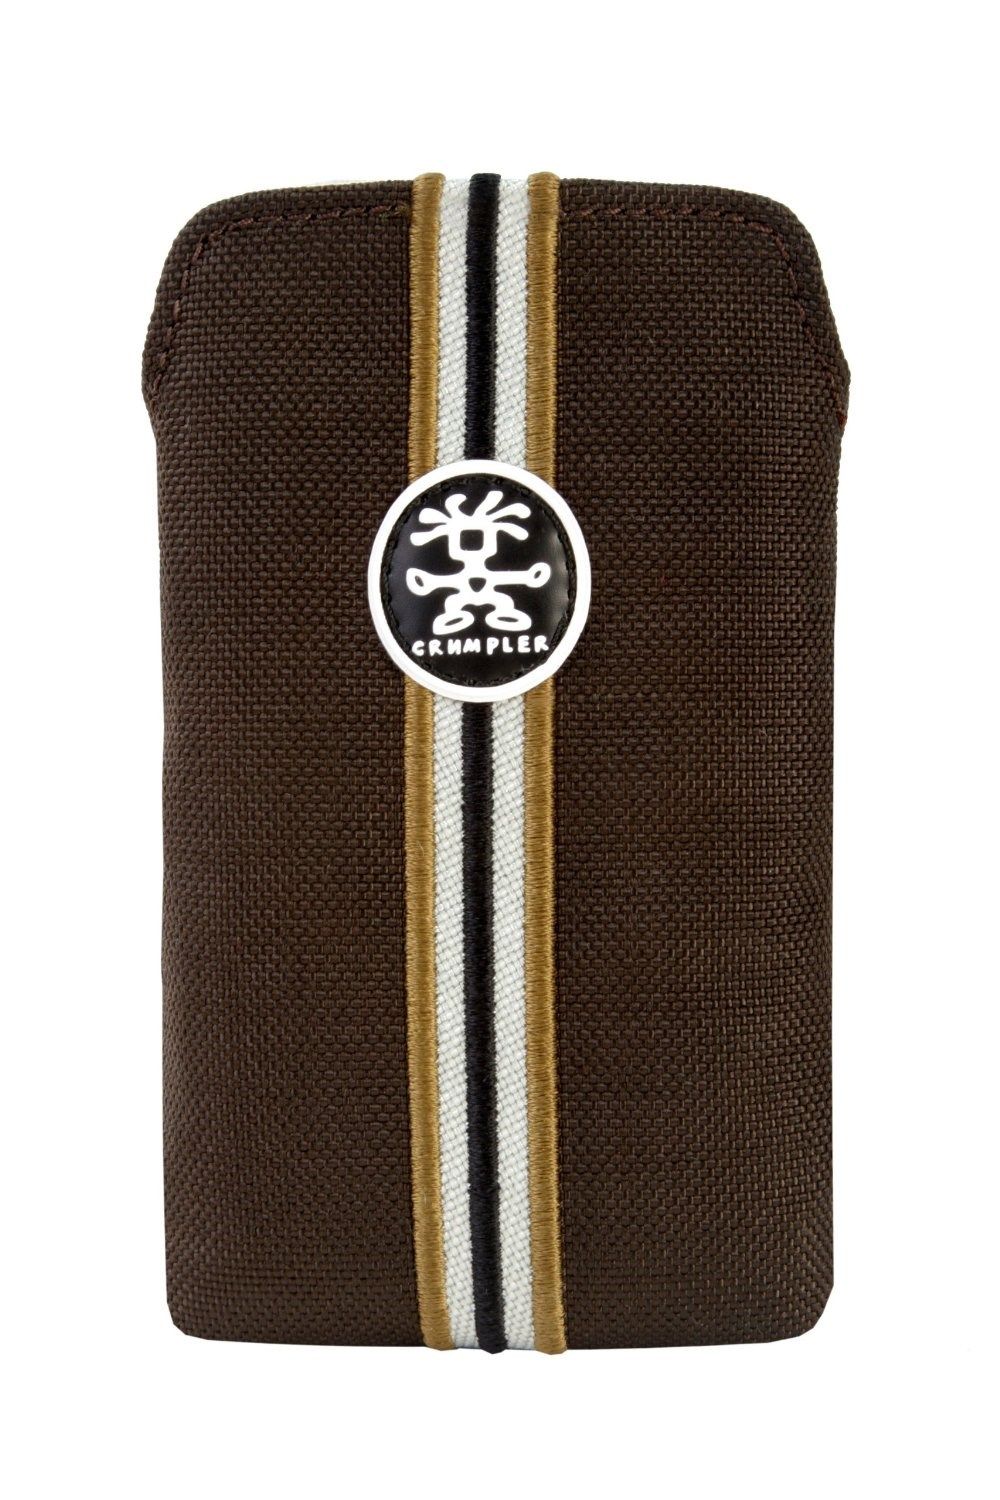 Crumpler The Culchie Pouch case for Apple iPhone 3, 4 & 4S - iPod Touch espresso Brown